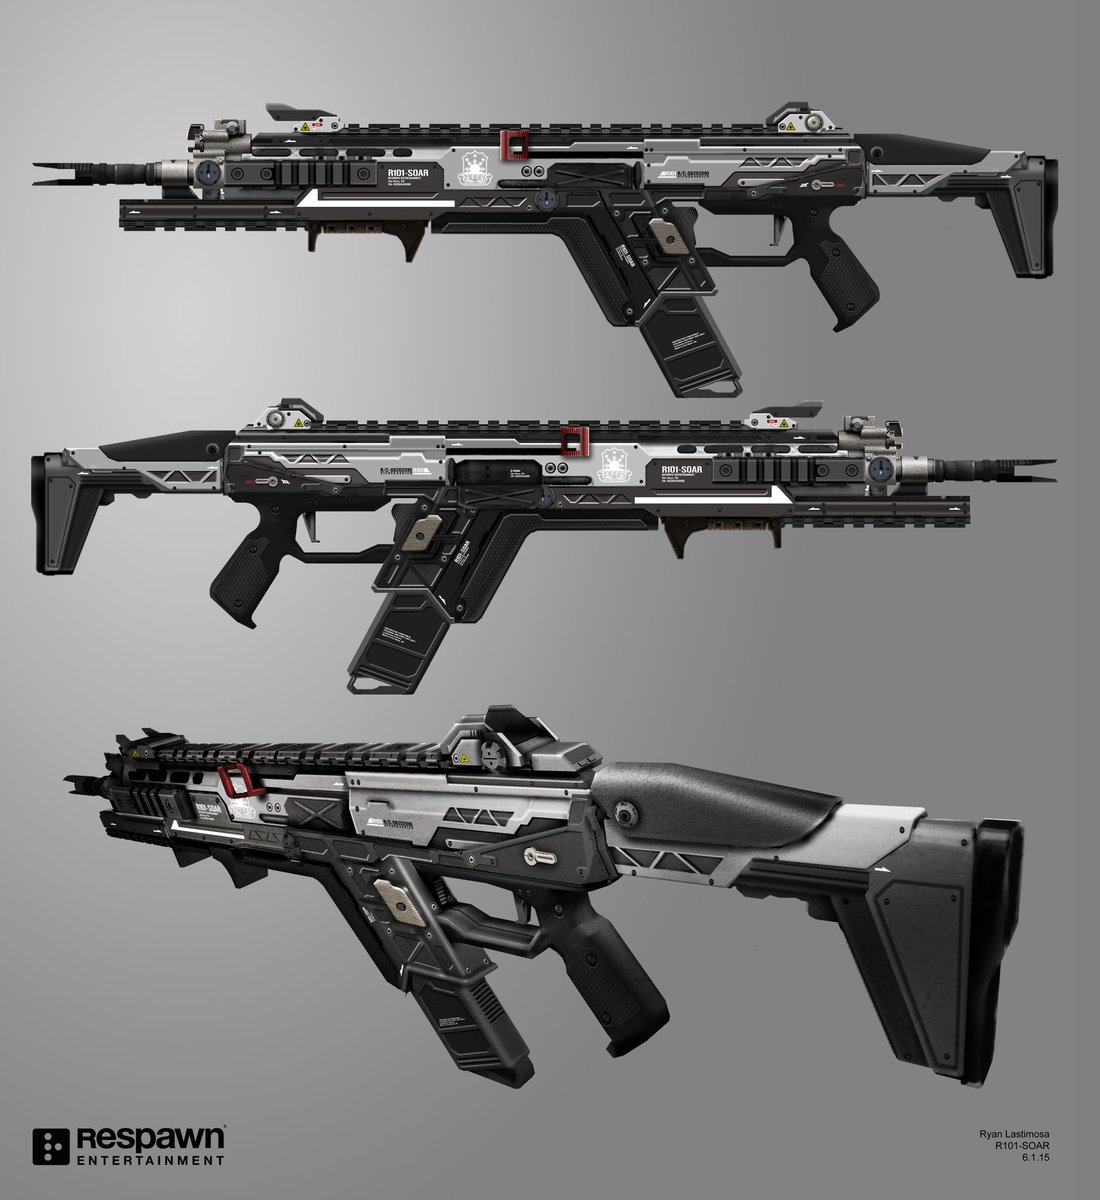 Ryan Lastimosa Here S A Series Of Concepts Of The R101 R1 R301 Rifles And The Dmr From Titanfall And Apex Legends This Weapon Has Evolved A Great Deal From 10